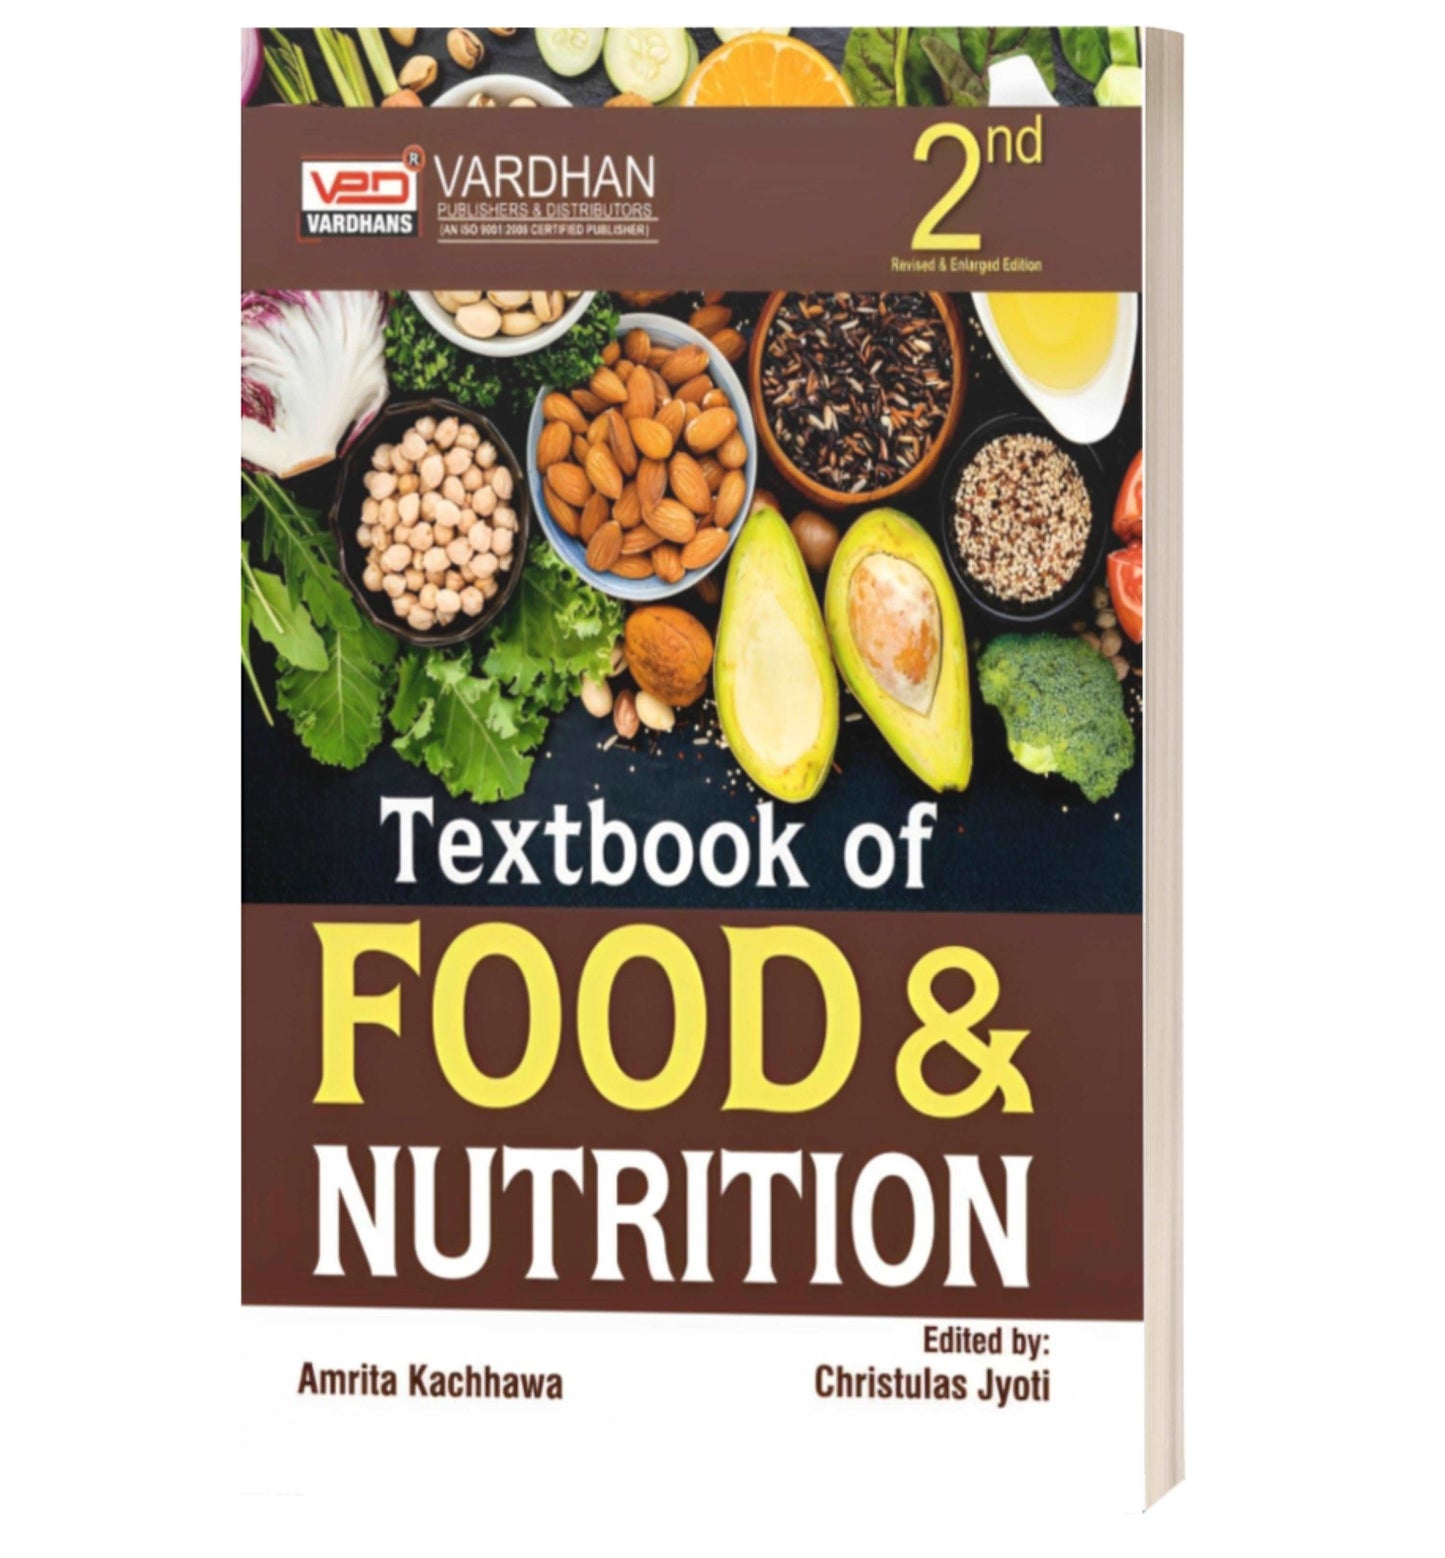 Textbook of Food & Nutrition